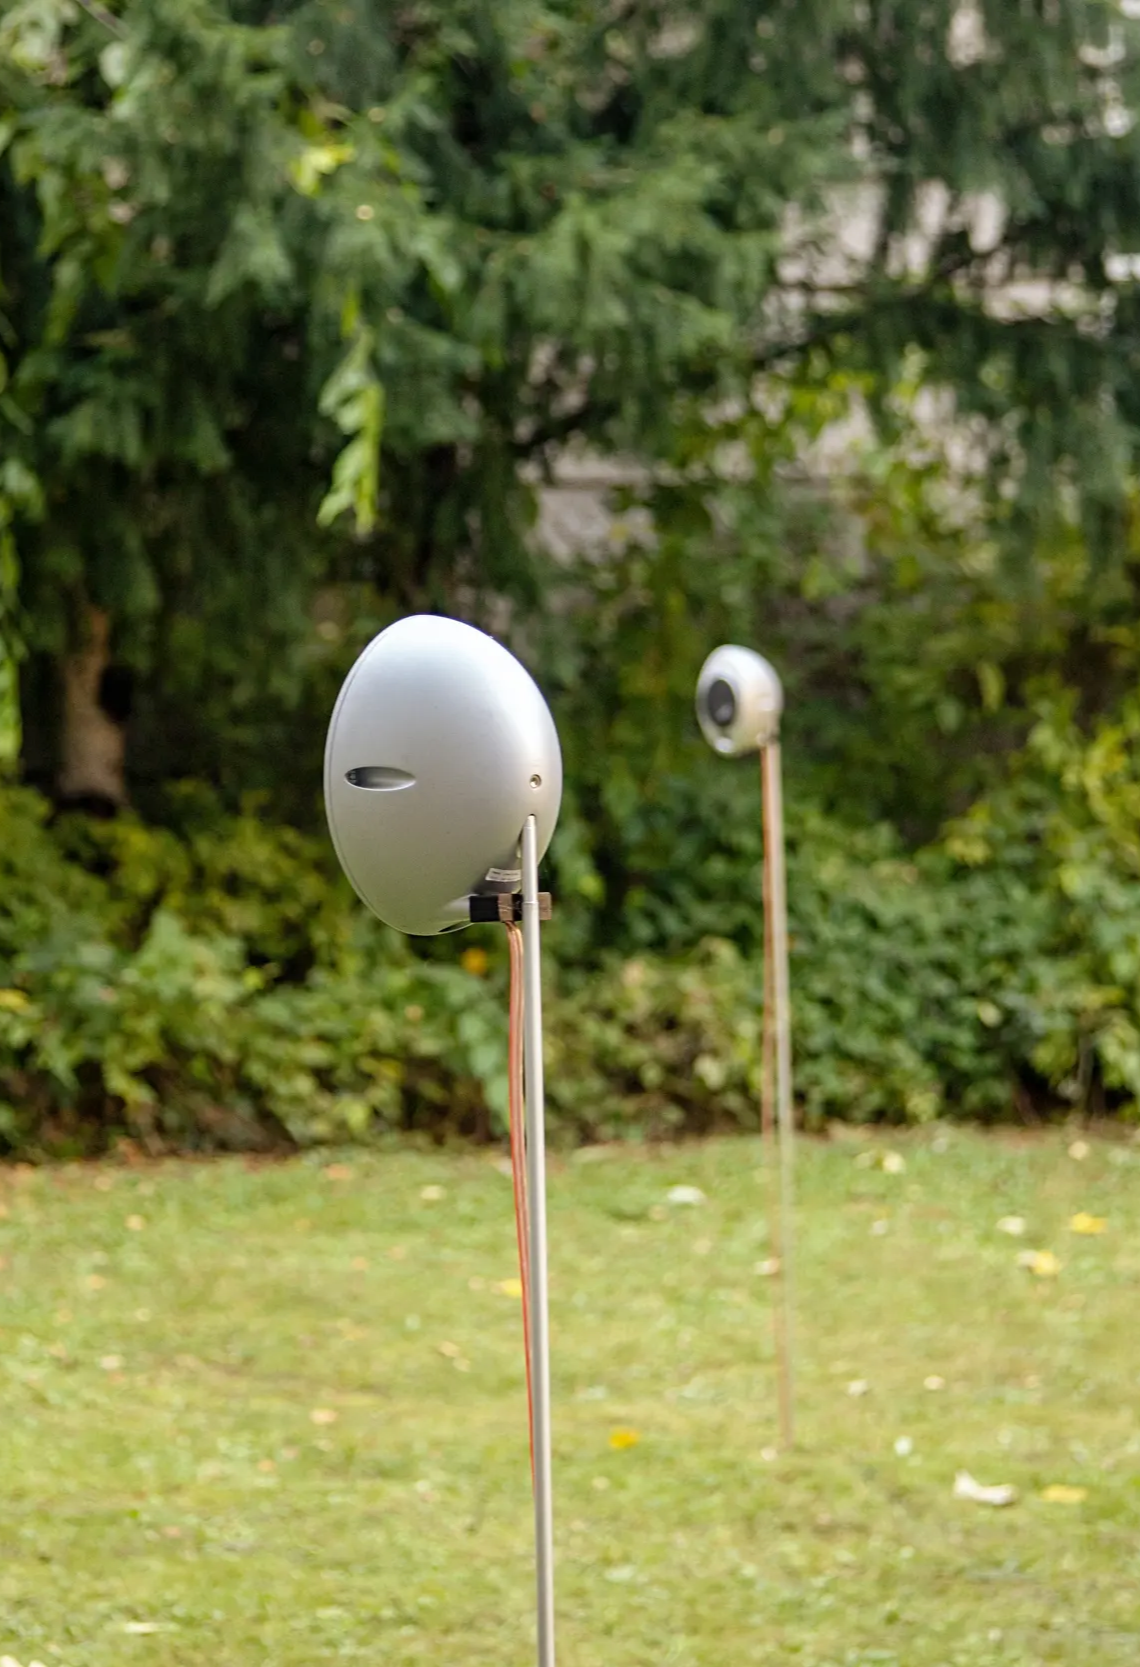 close up photo of a speaker on a rod. the blurry background shows green scenery